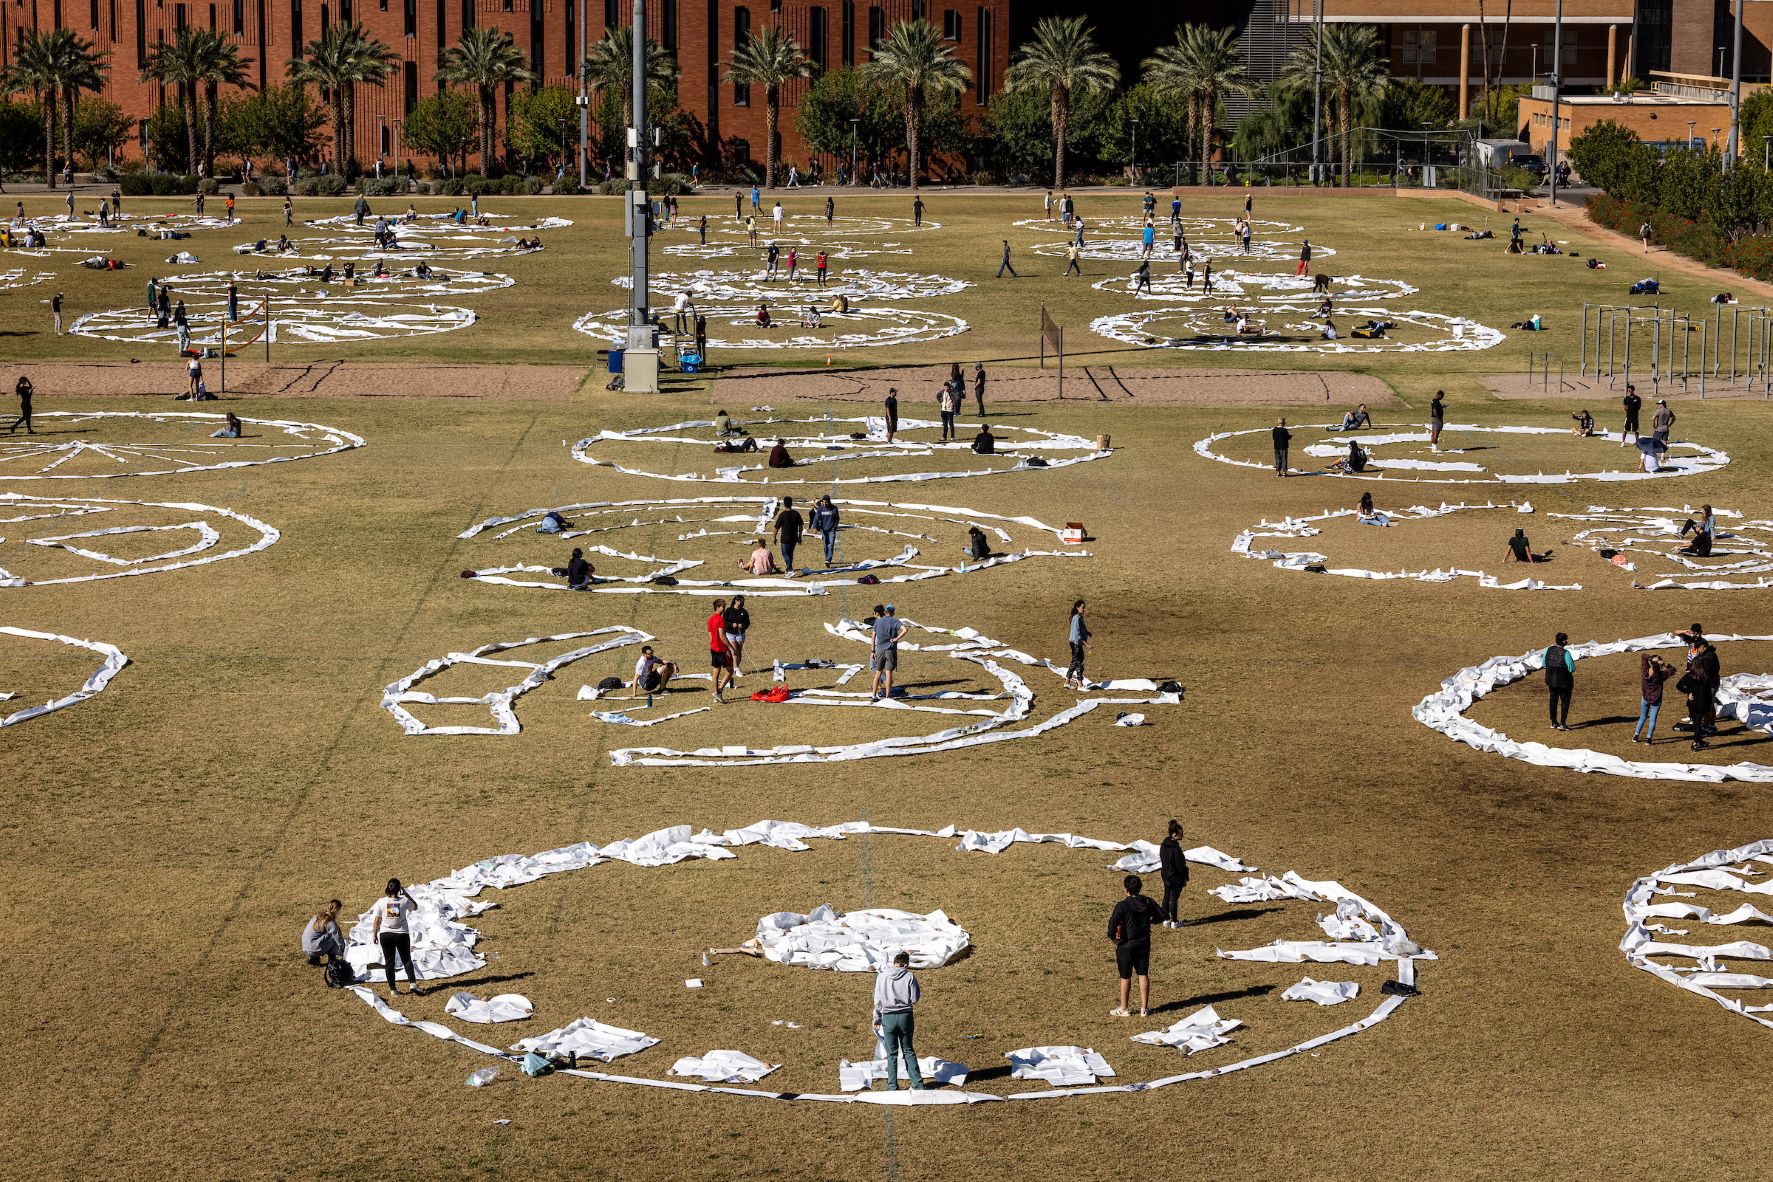 Students in ASU's Architecture 101 studio course took over the Intramural Field on the Tempe campus with a collaborative project based on circles.